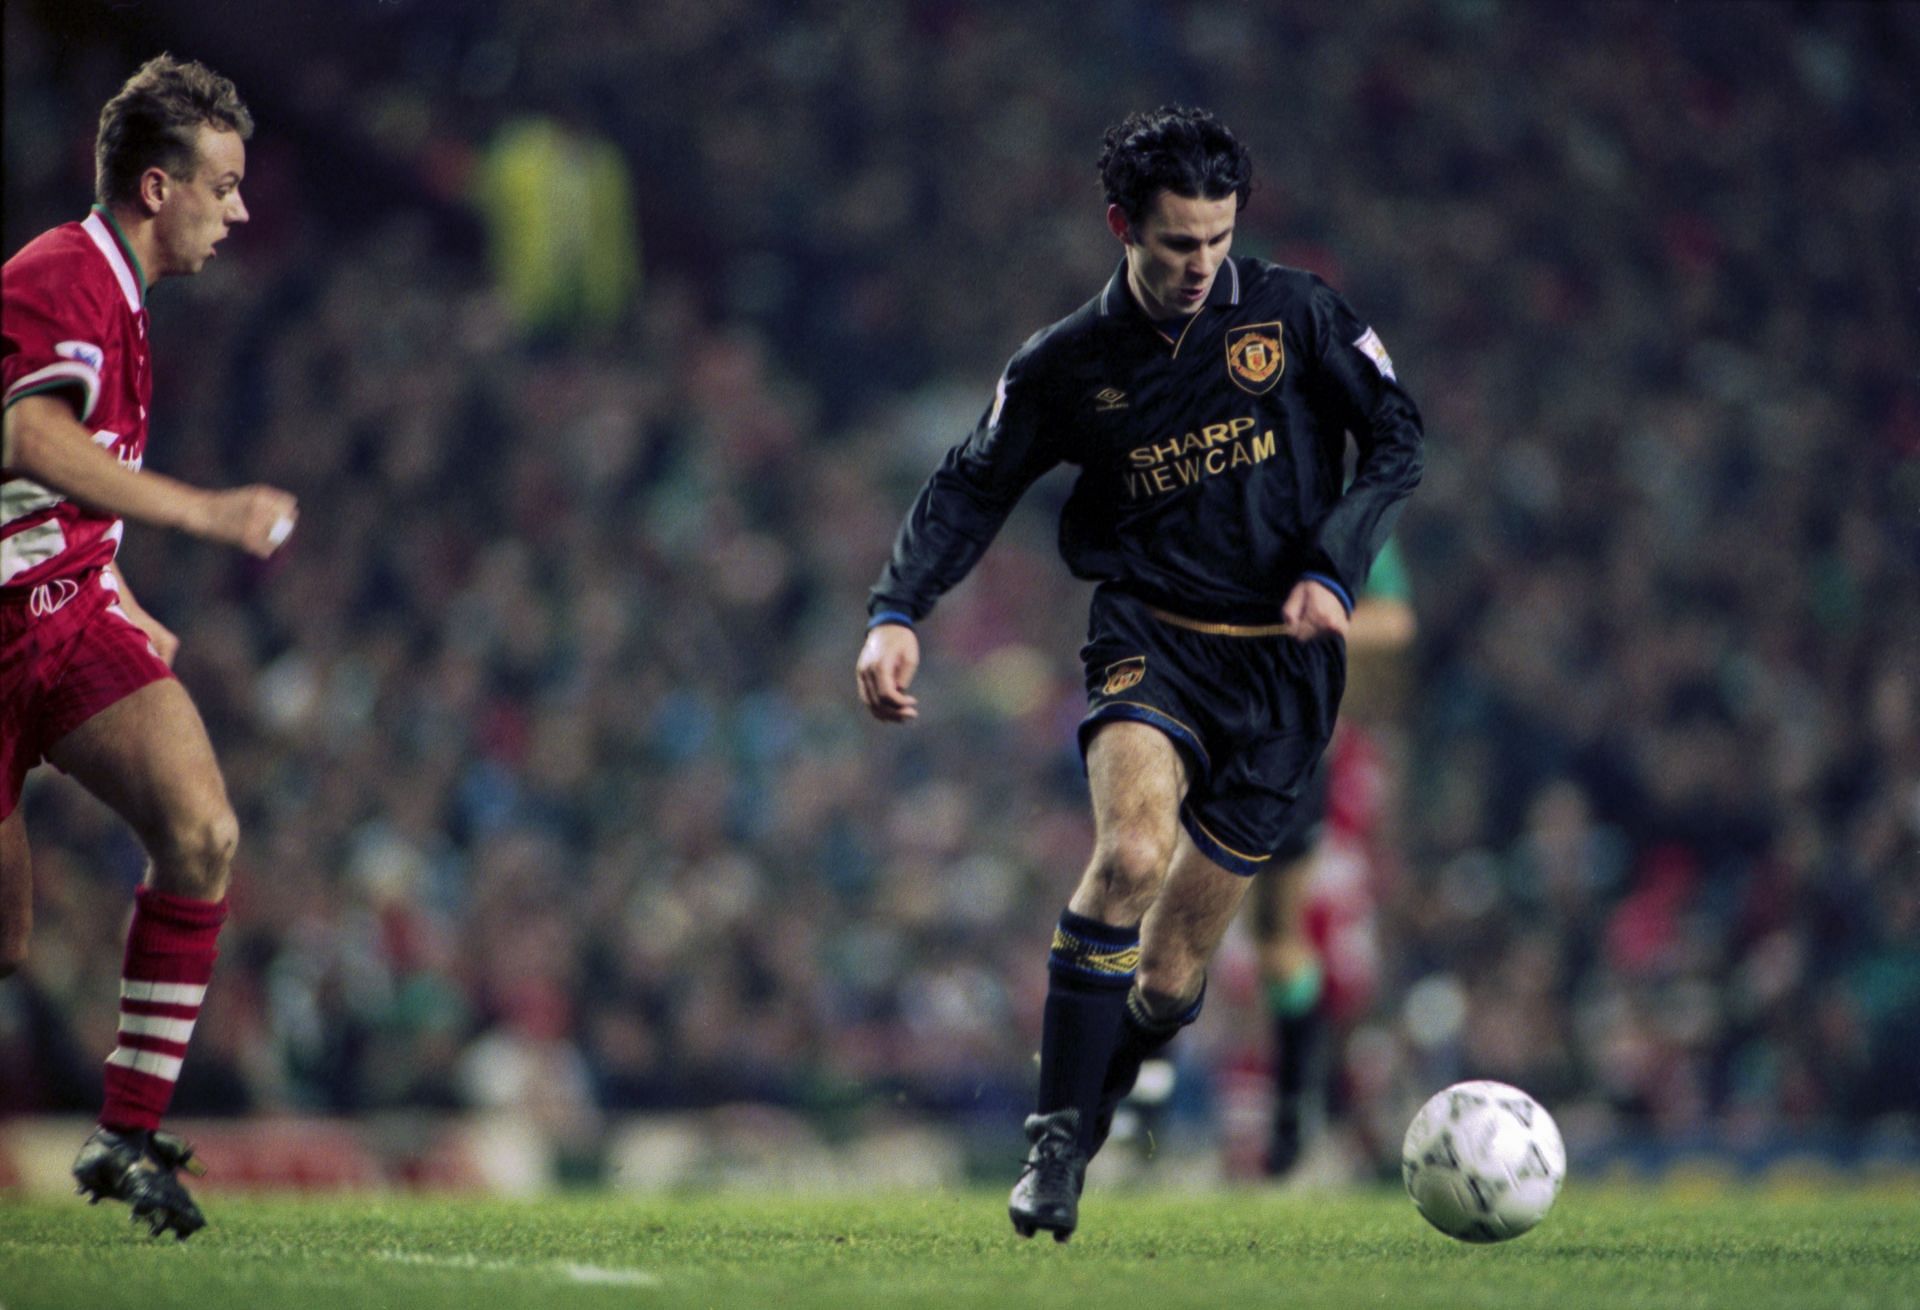 Giggs is one of the legends of the game.